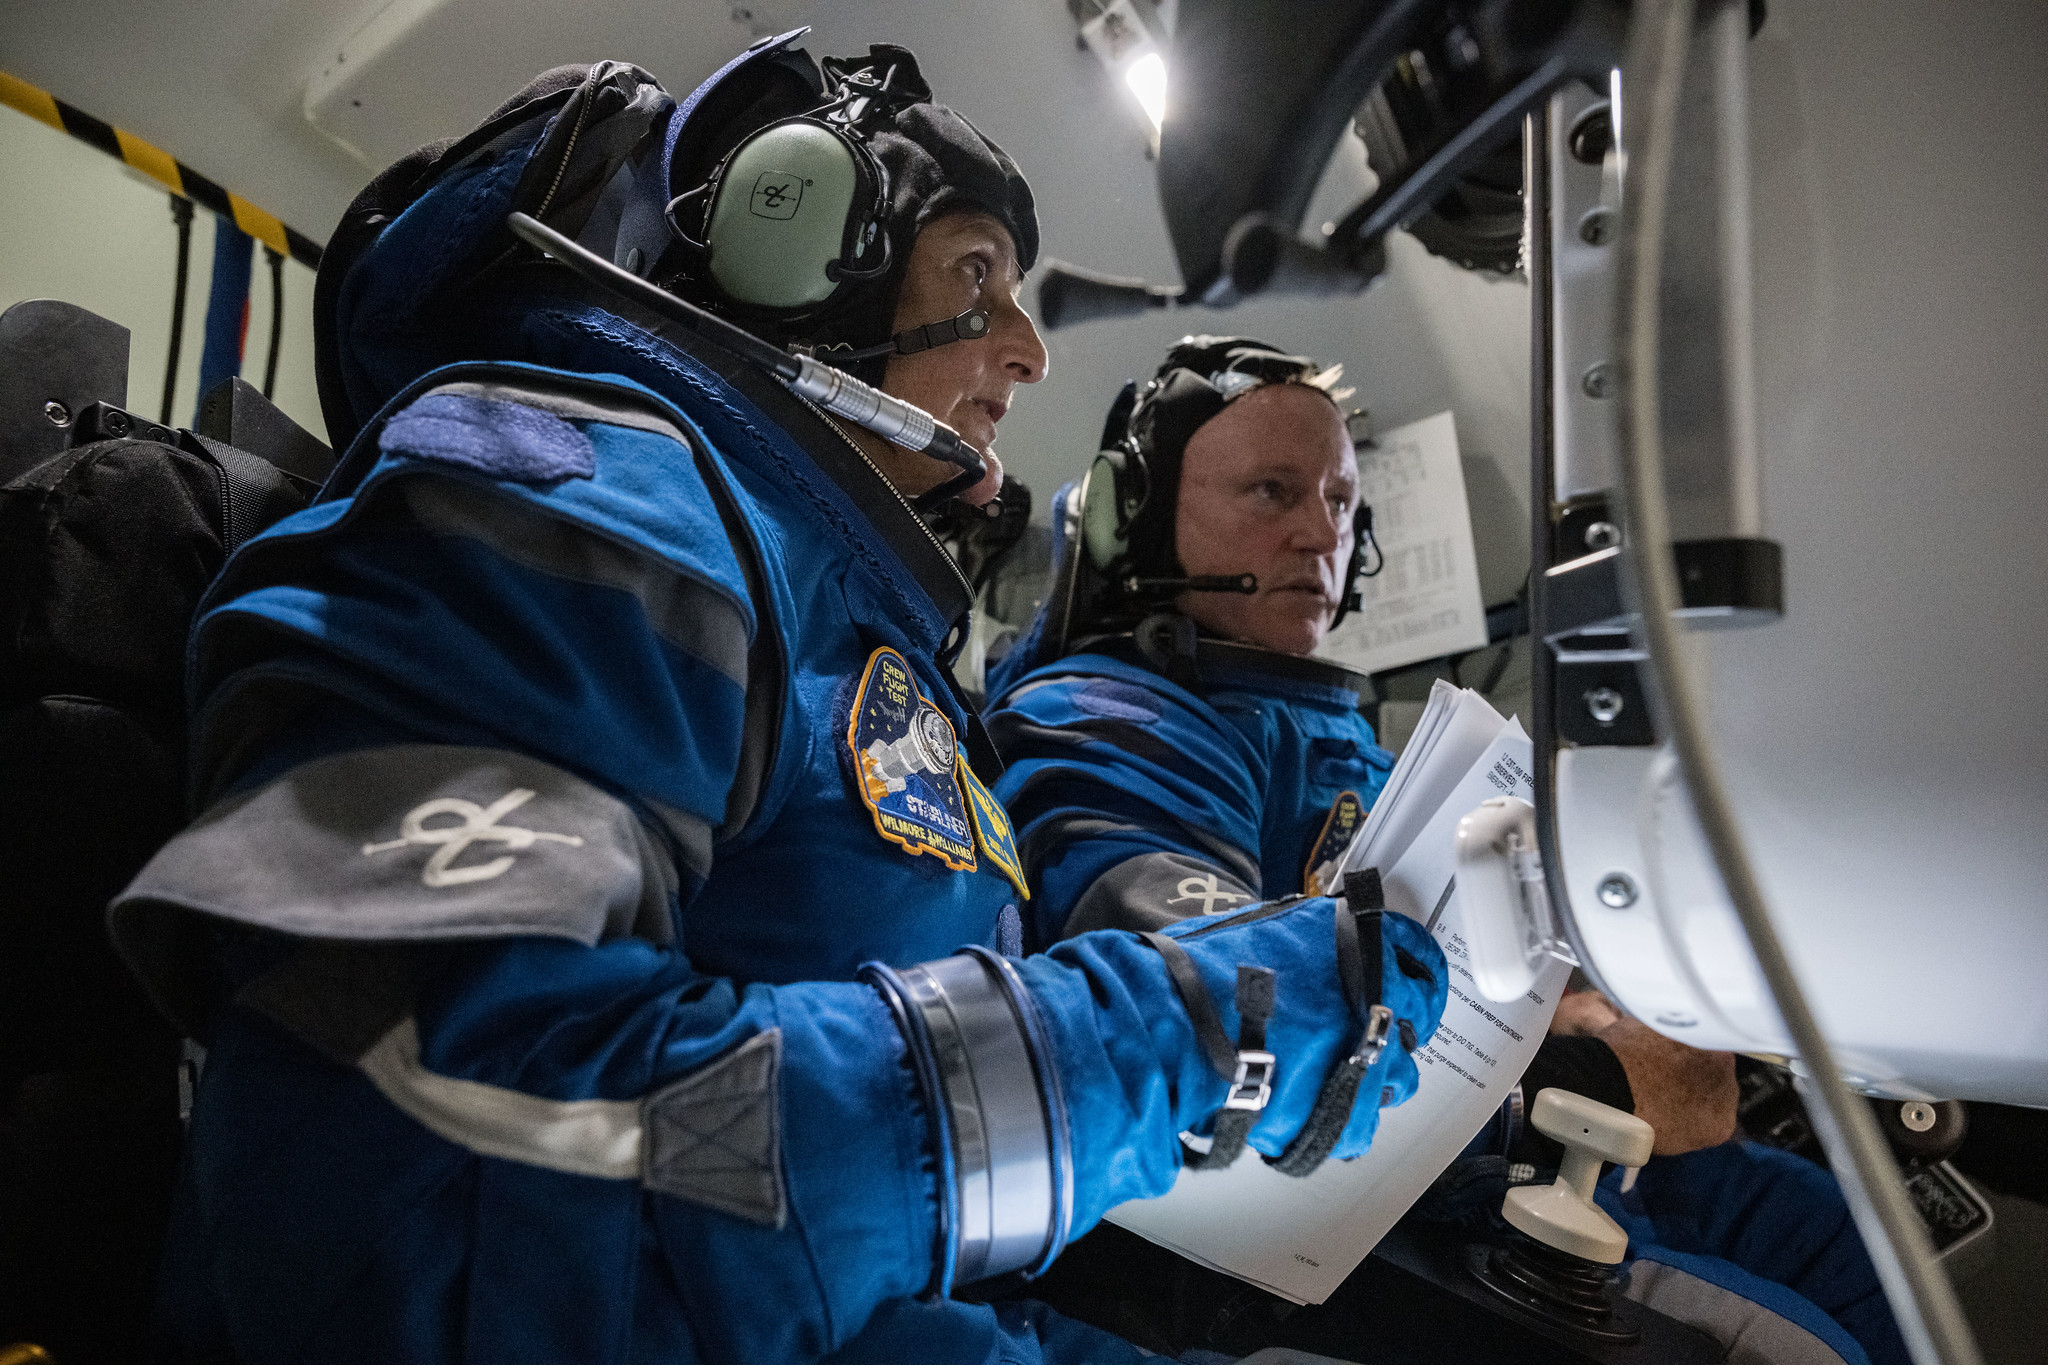 Boeing Crew Flight Test (CFT) crew members Butch Wilmore and Suni Williams during Suited EMER SIM Operations in the Boeing Starliner simulator at NASA’s Johnson Space Center.